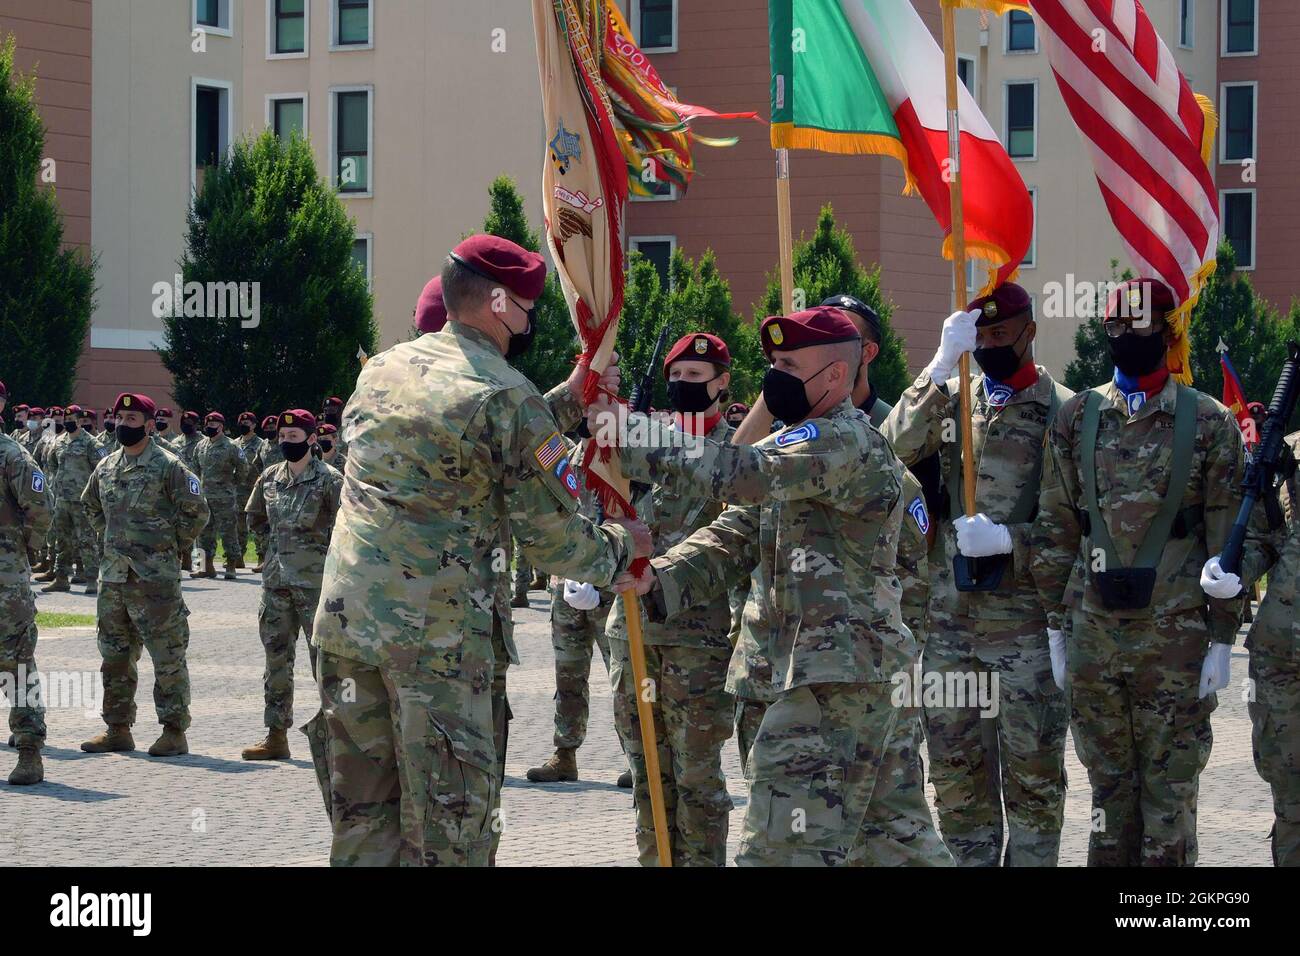 U.S. Army Lt. Col. Nathan A. Strohm, outgoing commander, 173rd Brigade Support Battalion, 173rd Airborne Brigade, passes the colors to Col. Kenneth J. Burgess, commander of the 173rd Airborne Brigade during change of command ceremony under Covid-19 prevention condition at Caserma Del Din, Vicenza, Italy June 14, 2021. The 173rd Airborne Brigade is the U.S. Army Contingency Response Force in Europe, capable of projecting ready forces anywhere in the U.S. European, Africa or Central Commands' areas of responsibility. Stock Photo